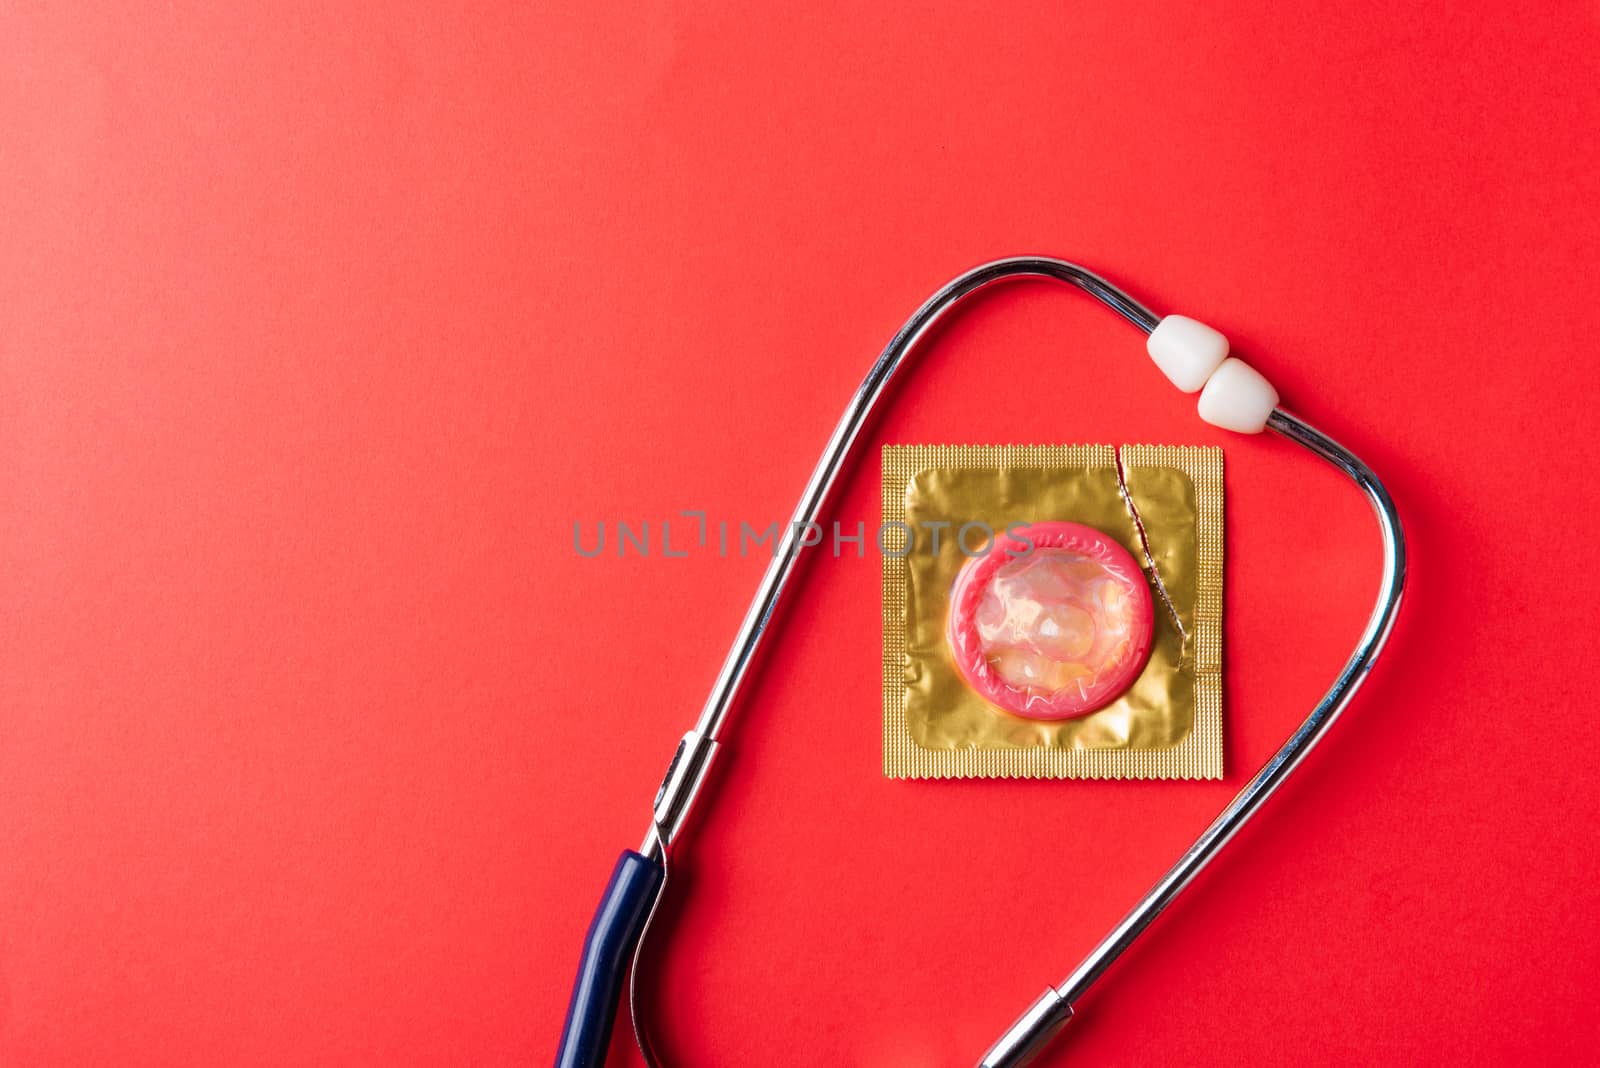 condom in pack and stethoscope by Sorapop